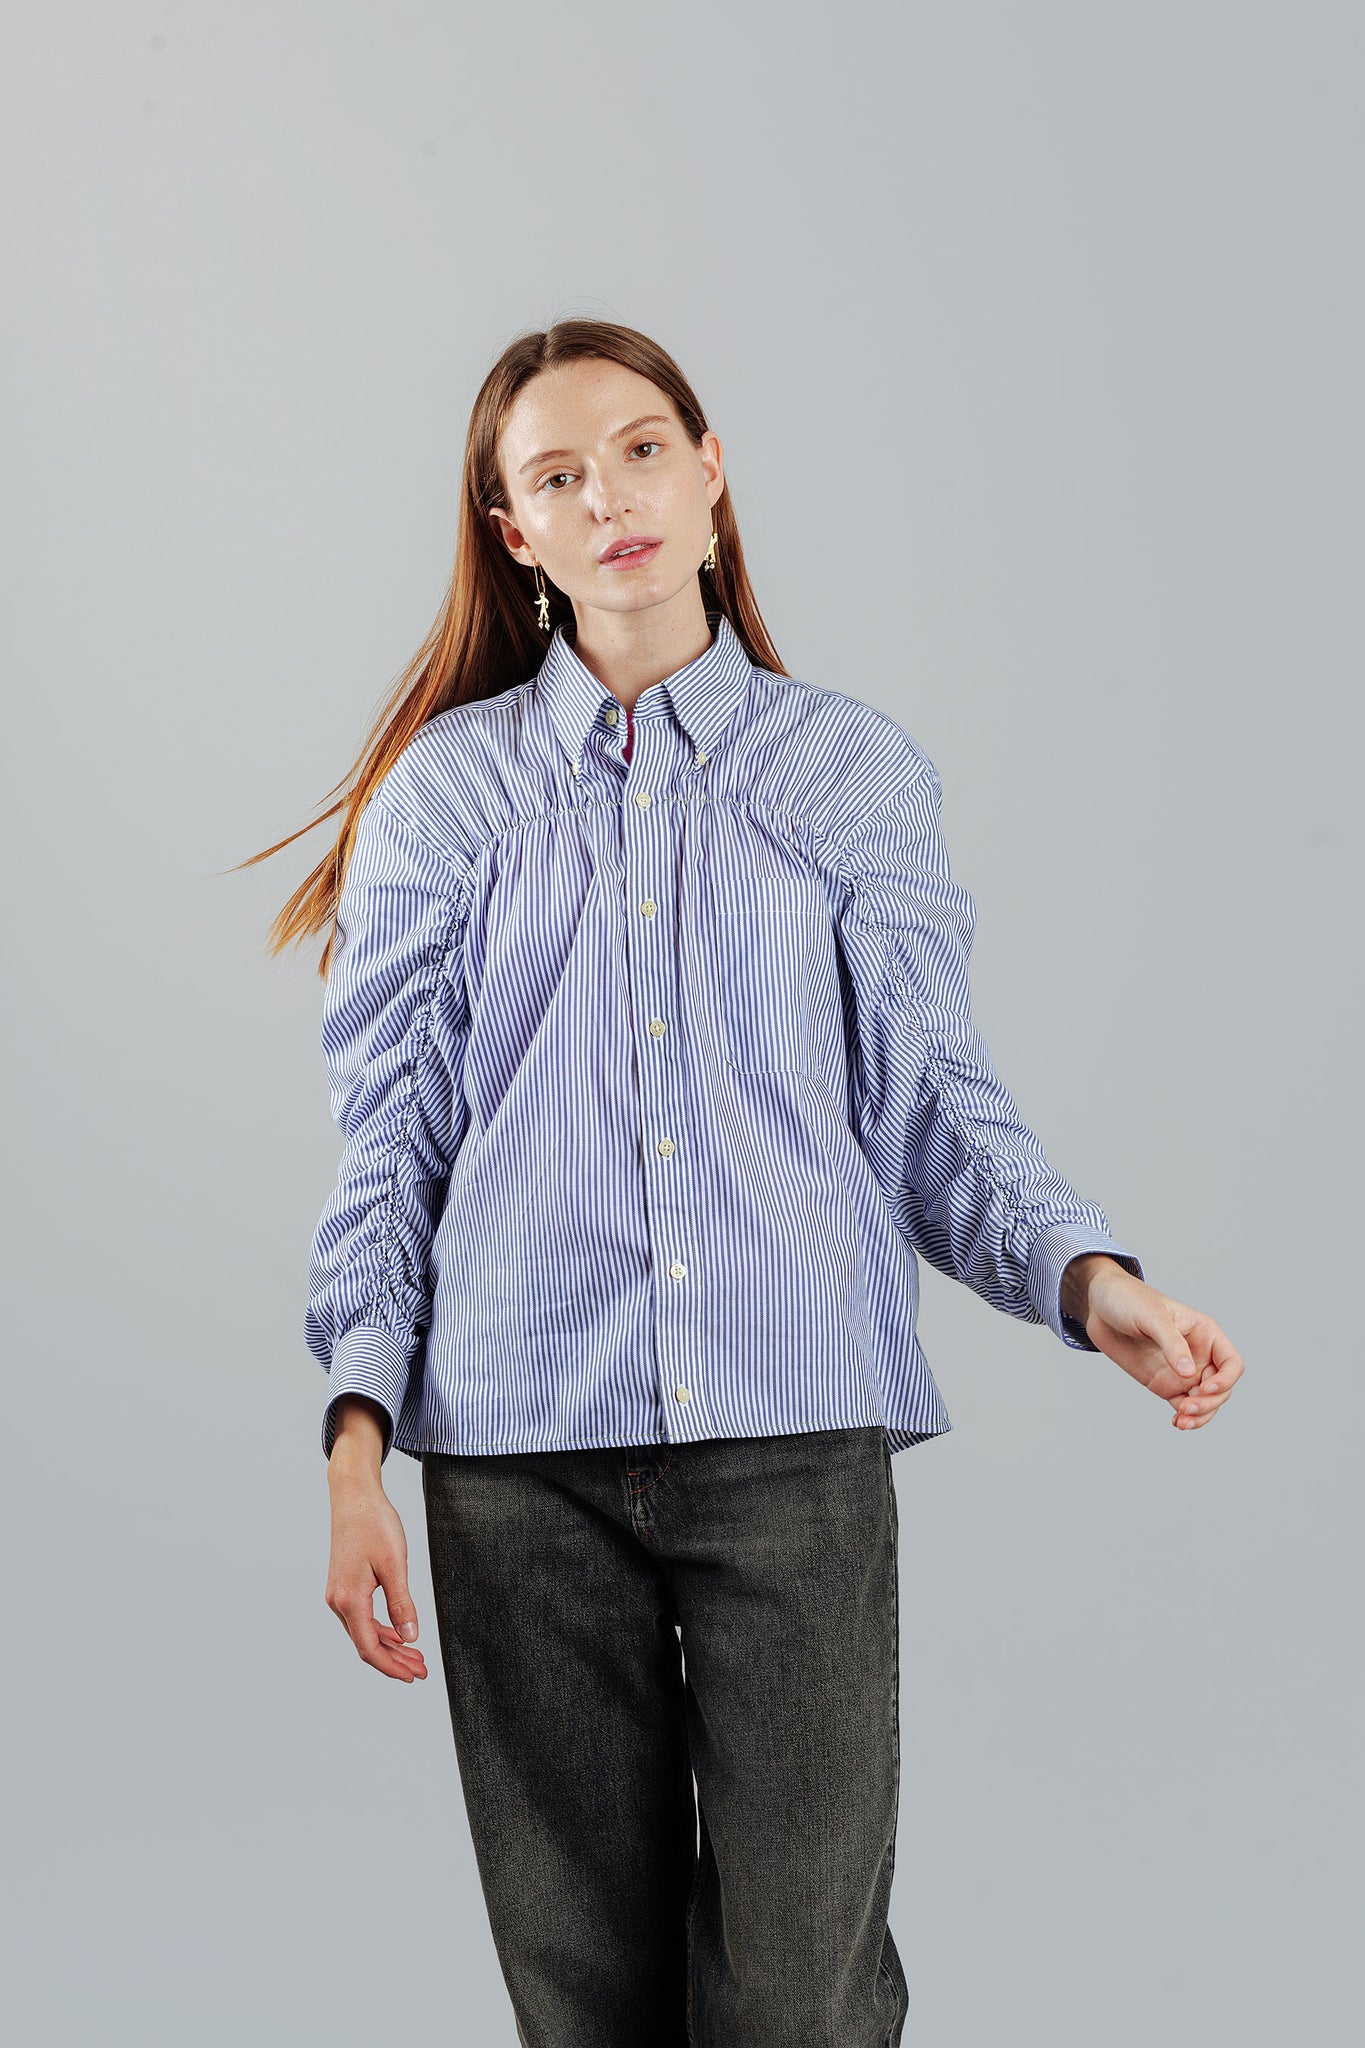 REWORKED SHIRT 004 [YOUR OWN SHIRT] – The Big Favorite